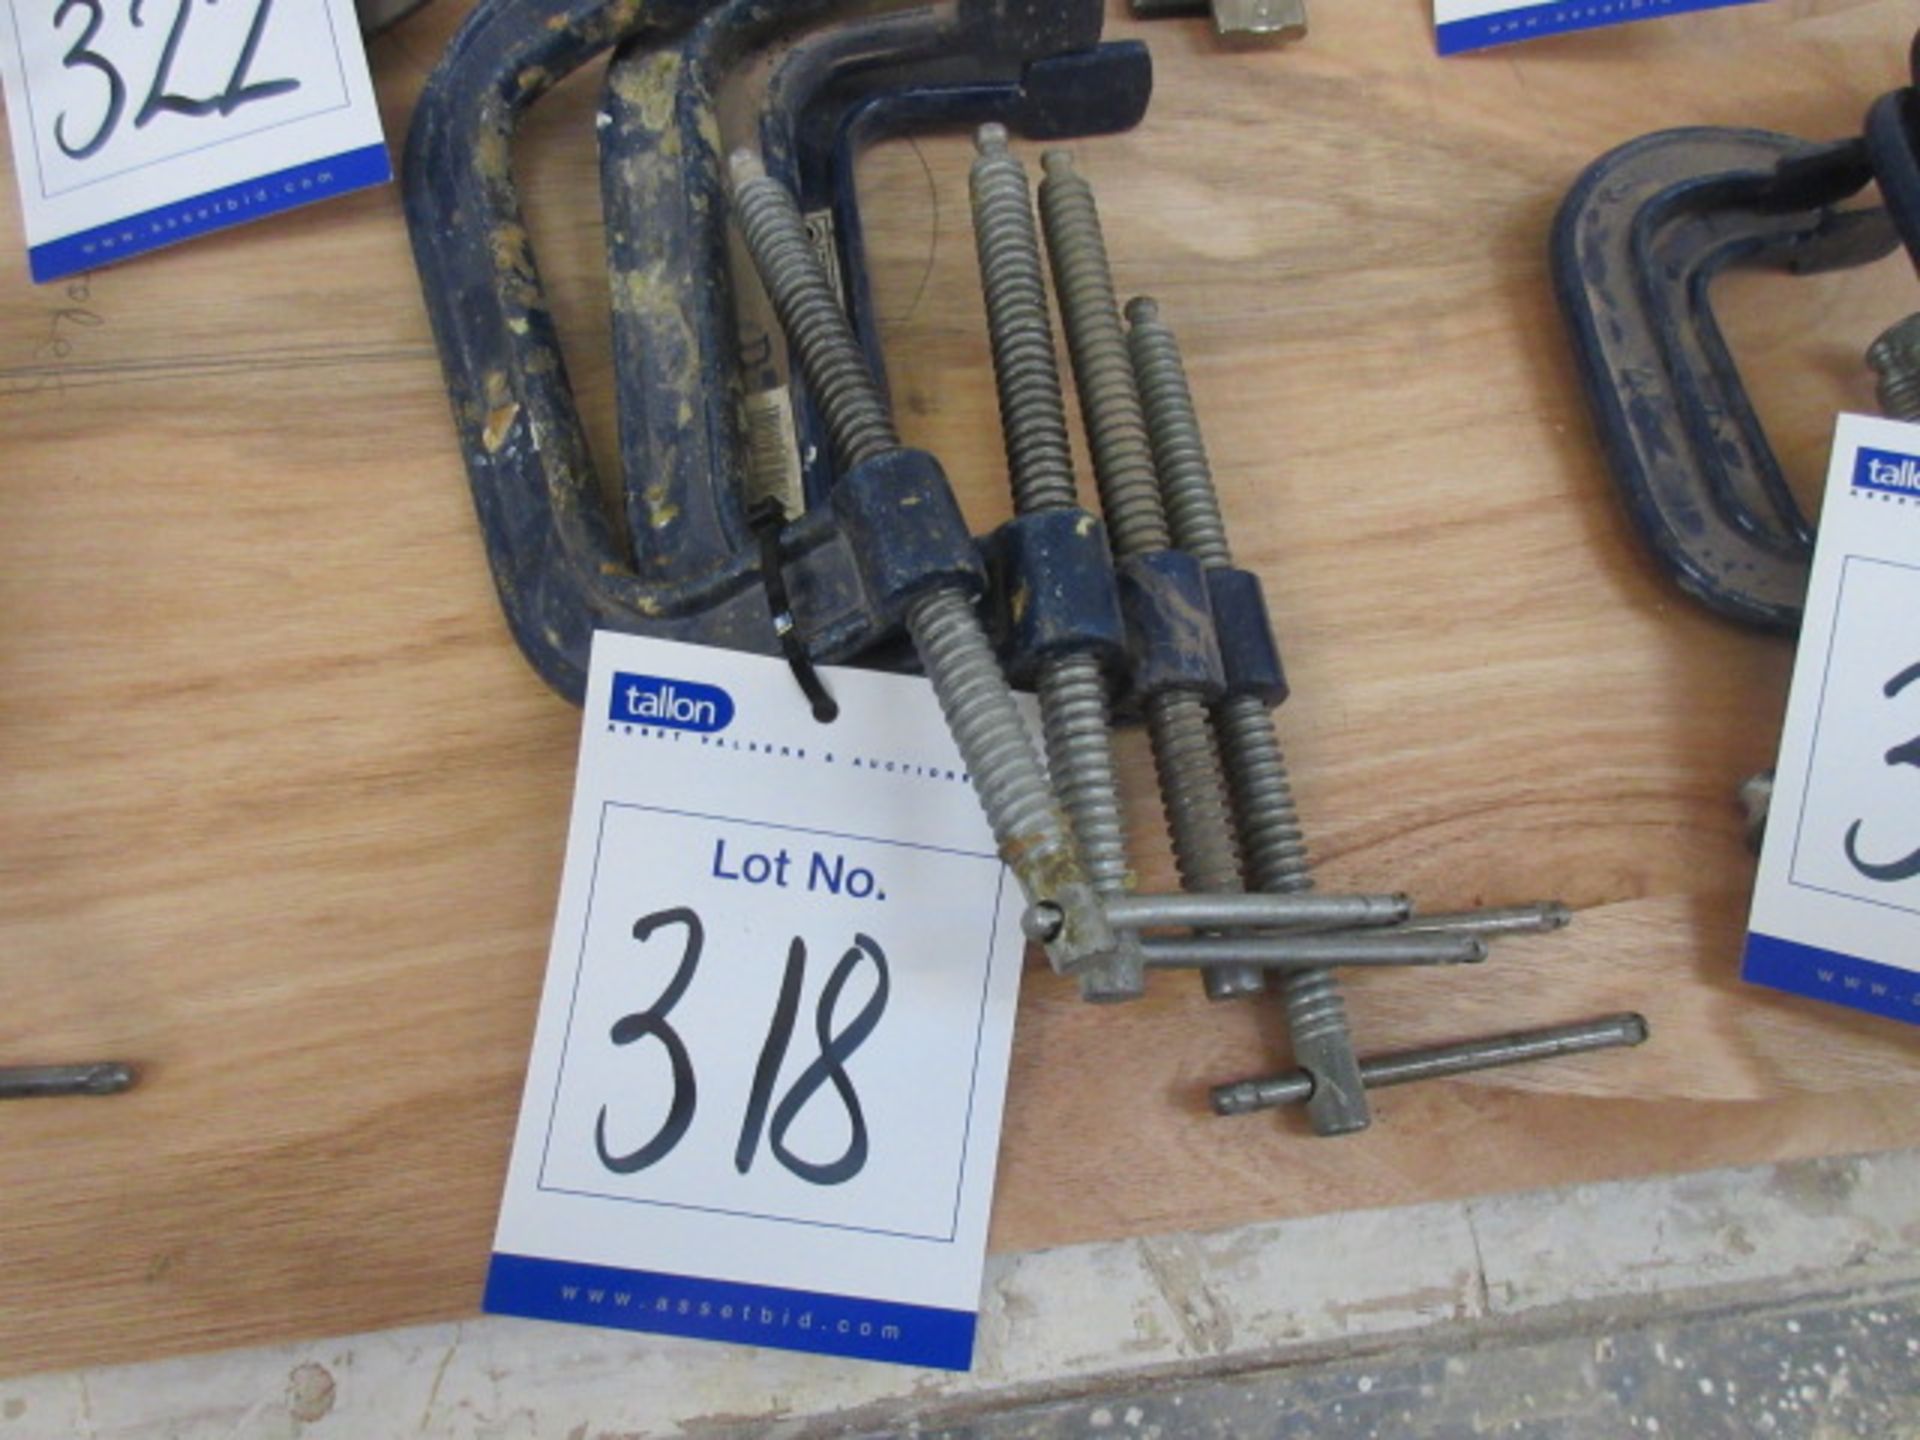 Four 6" 'G' clamps